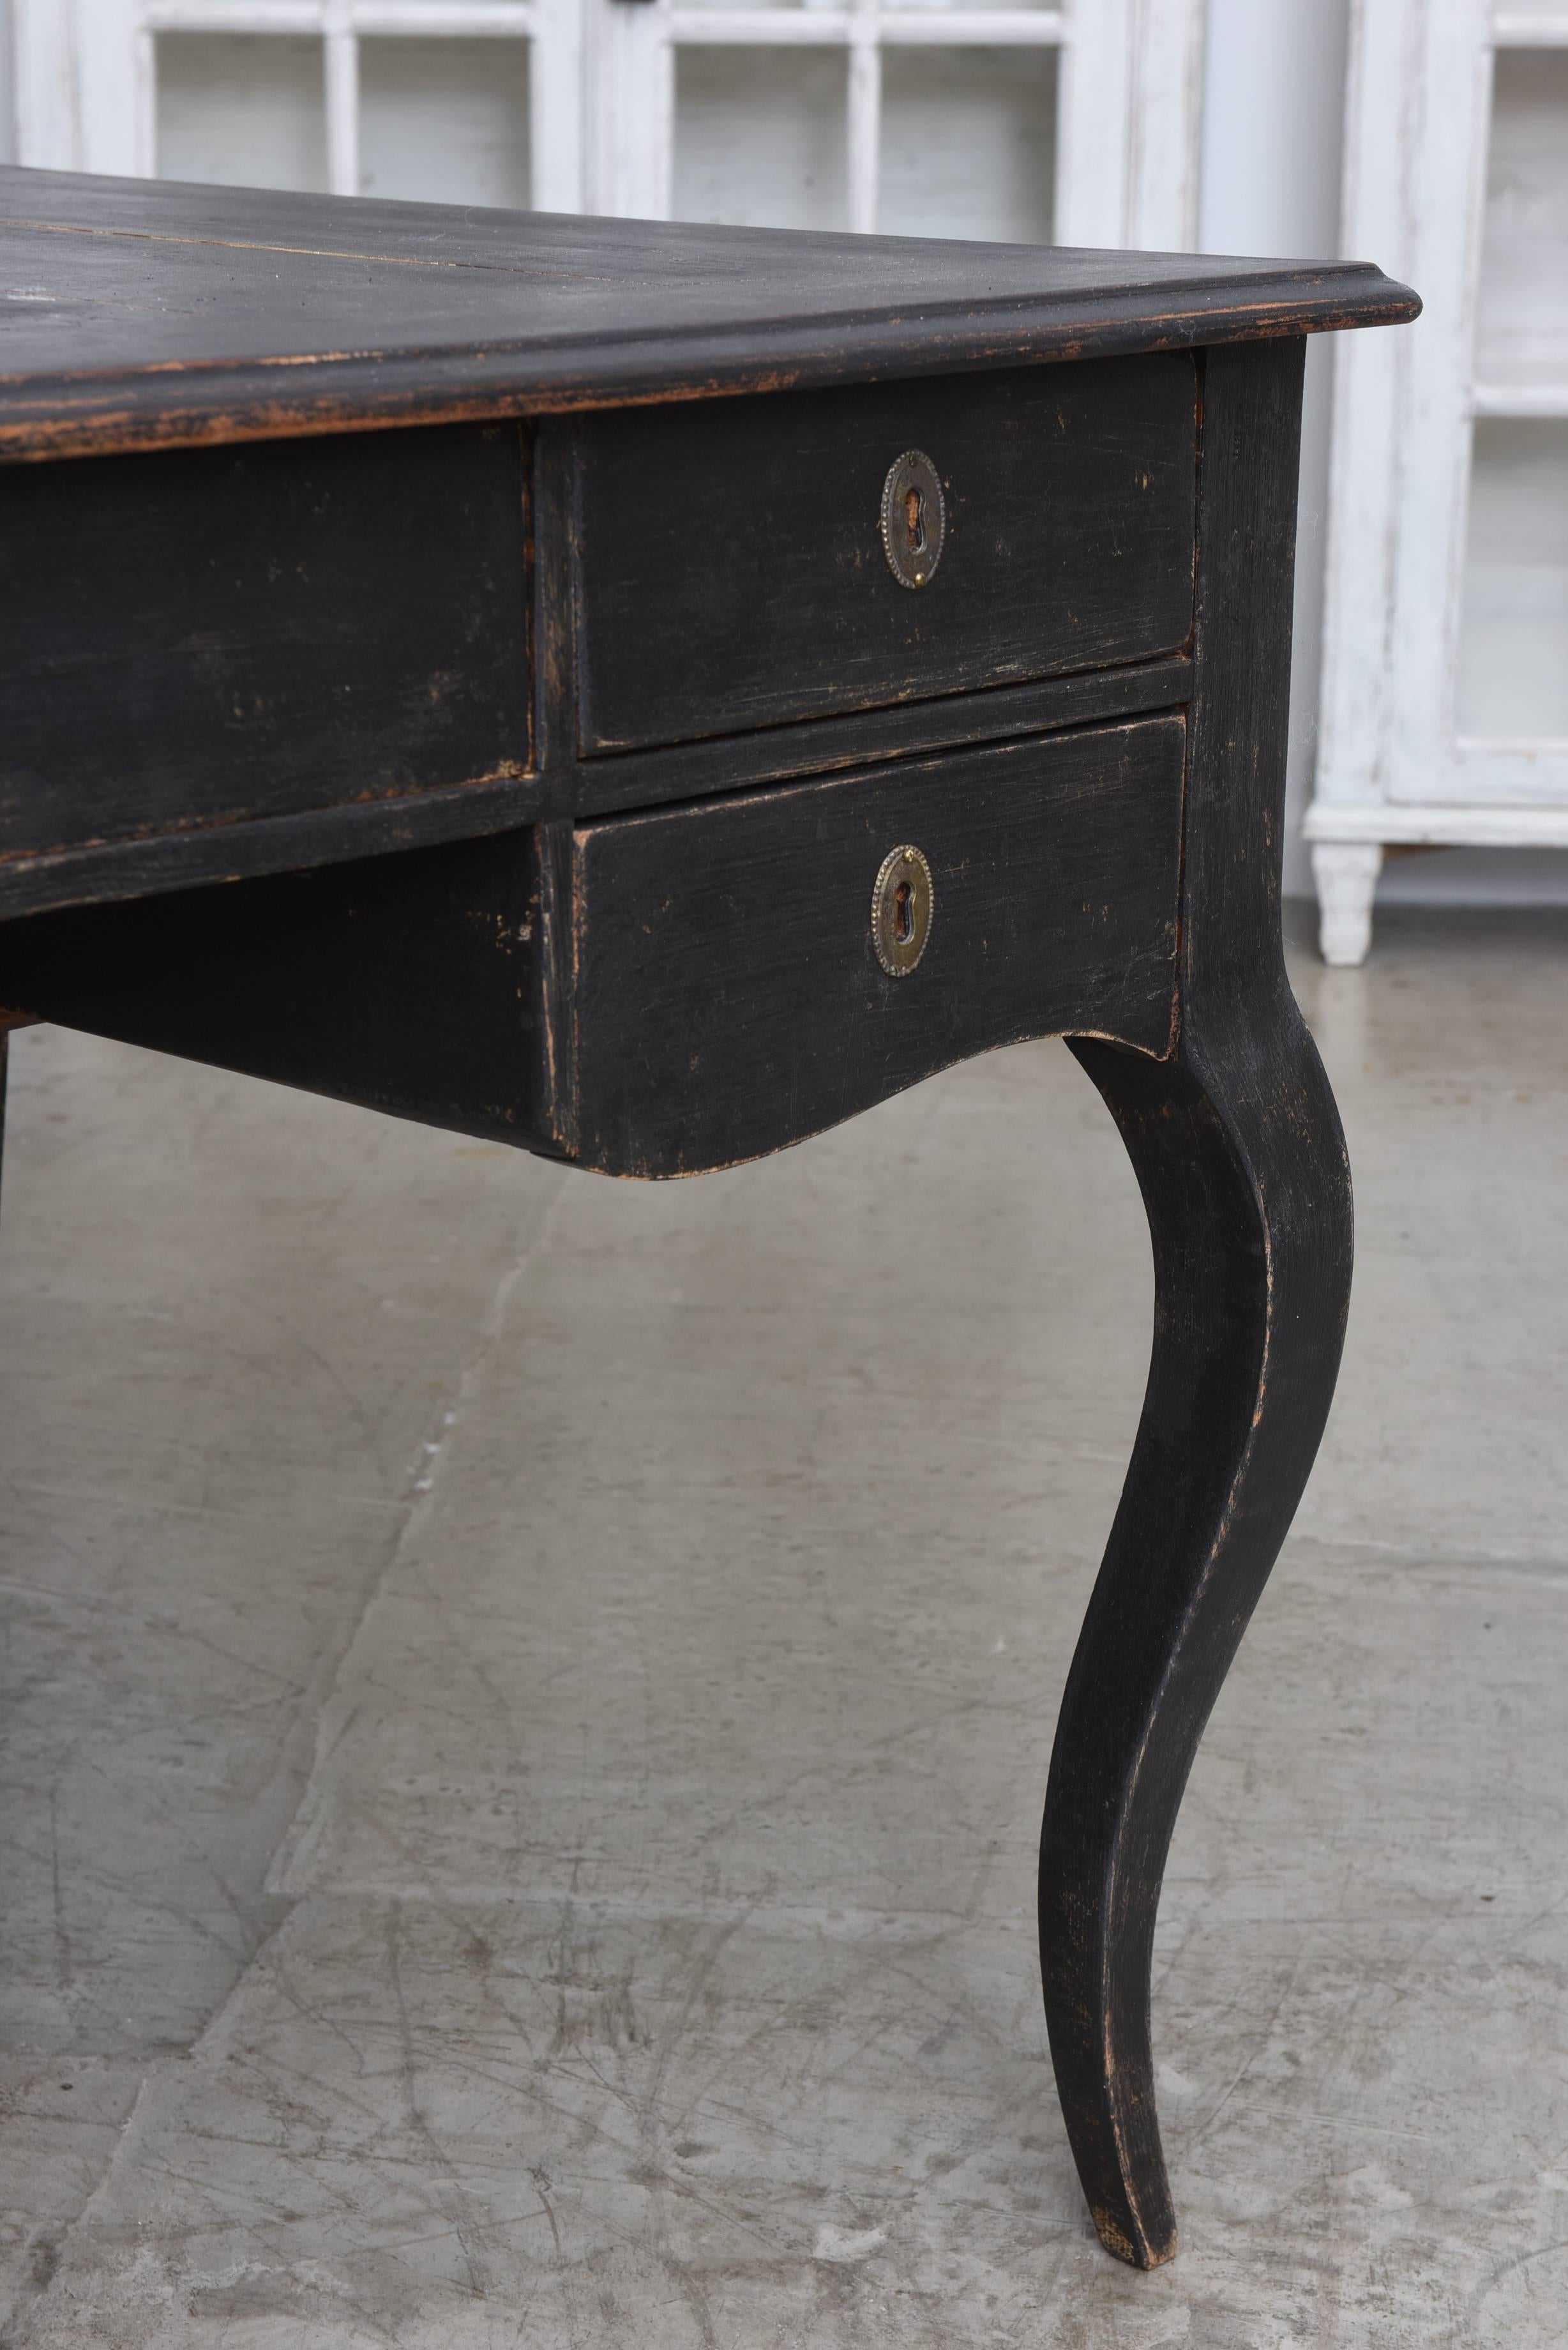 Antique Swedish partner writing desk early 19th century refreshed in the original 
black color.
The desk has beautiful Rococo style legs; and is finished on both sides with five drawers and locks and keys.
The desk is second period of Swedish